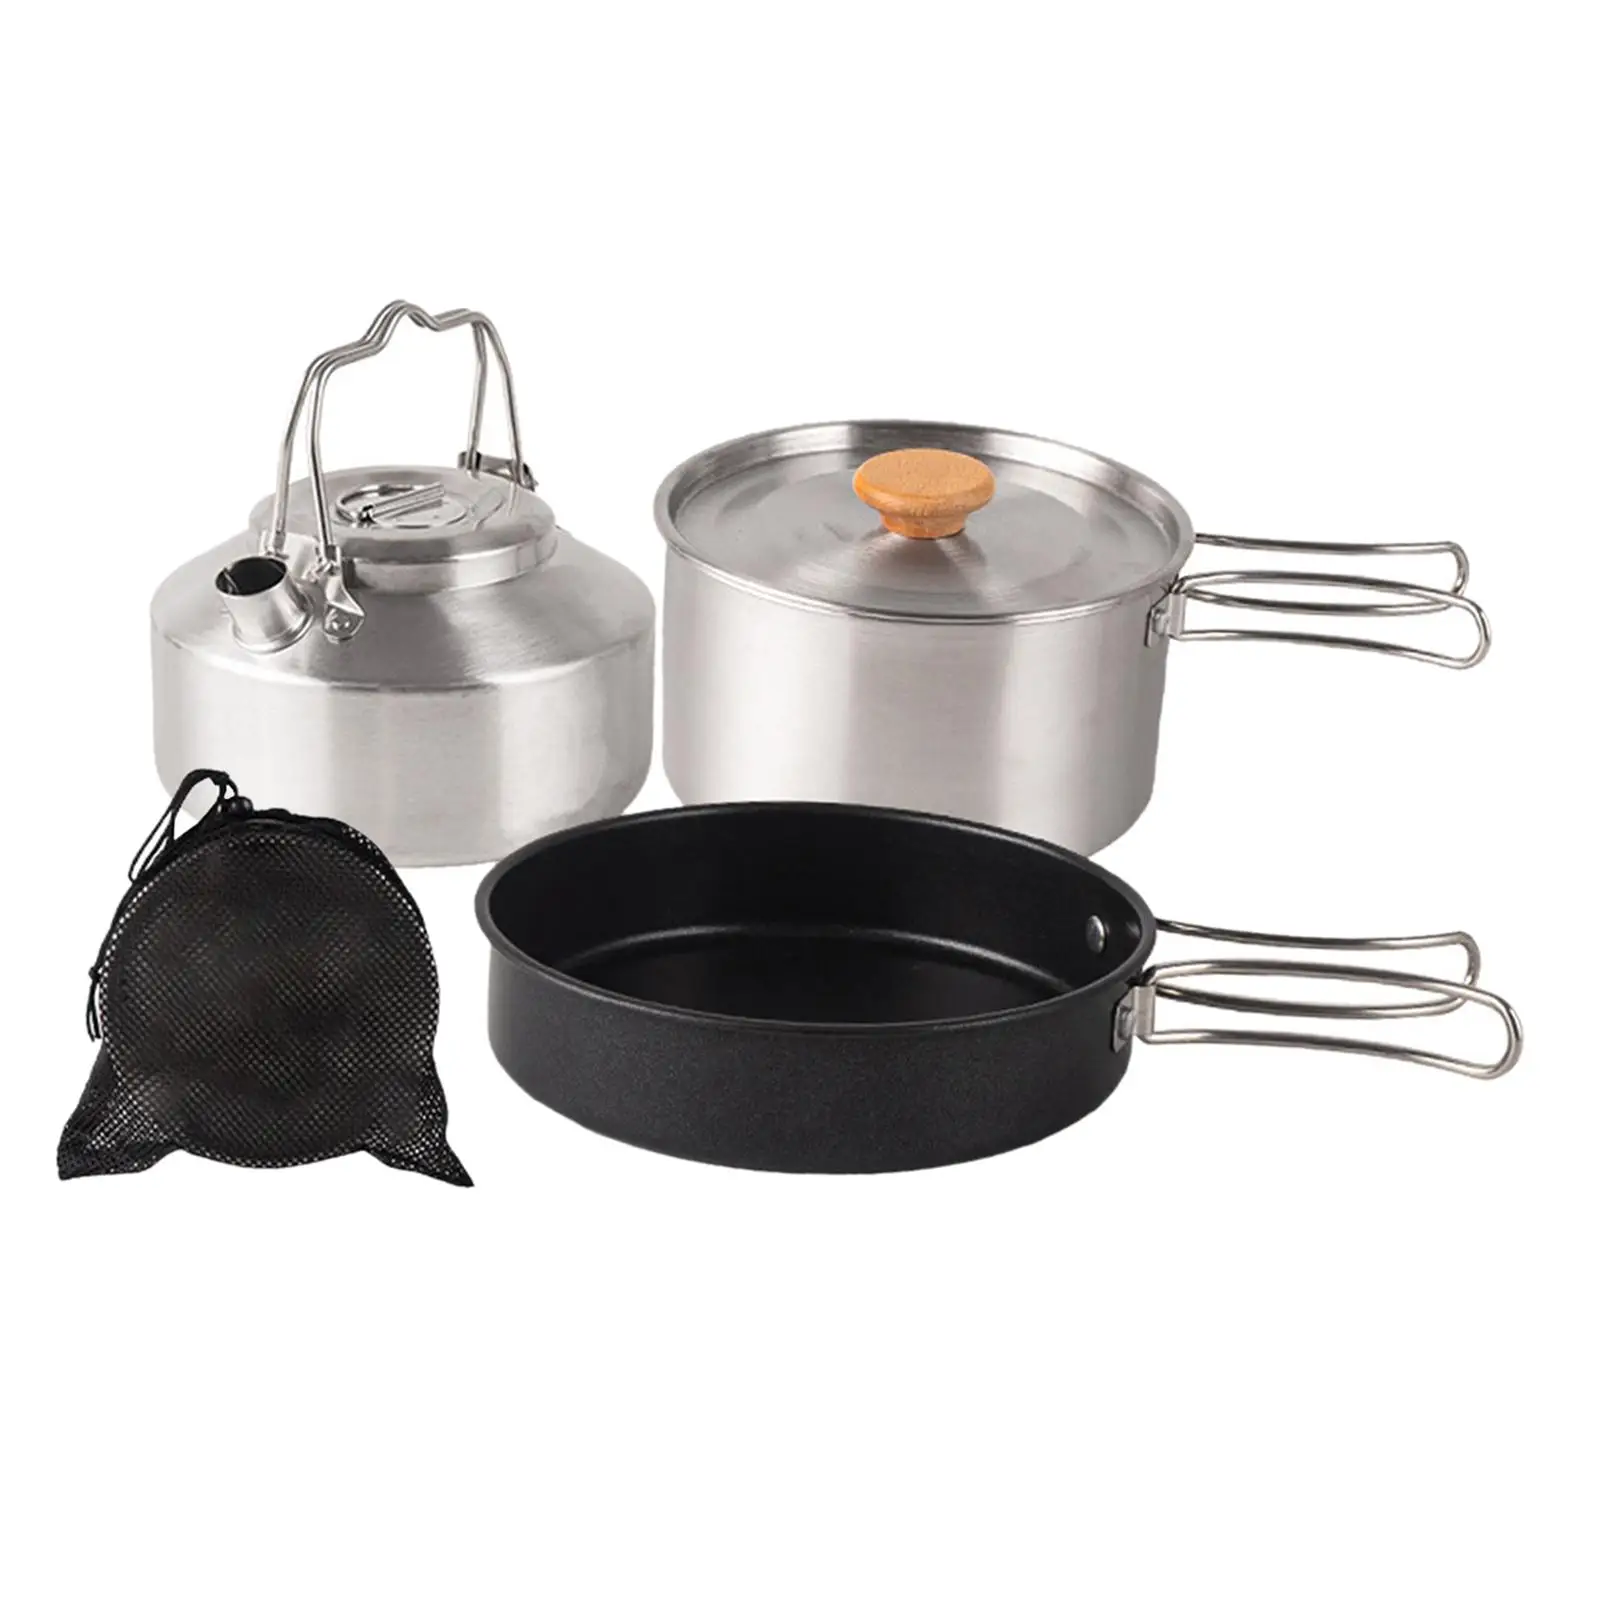 Camping Cookware Set Kitchen Utensils Camping Cooking Set Camping Pot and Pan Kettle for Picnic Cooking Fishing Camping Home